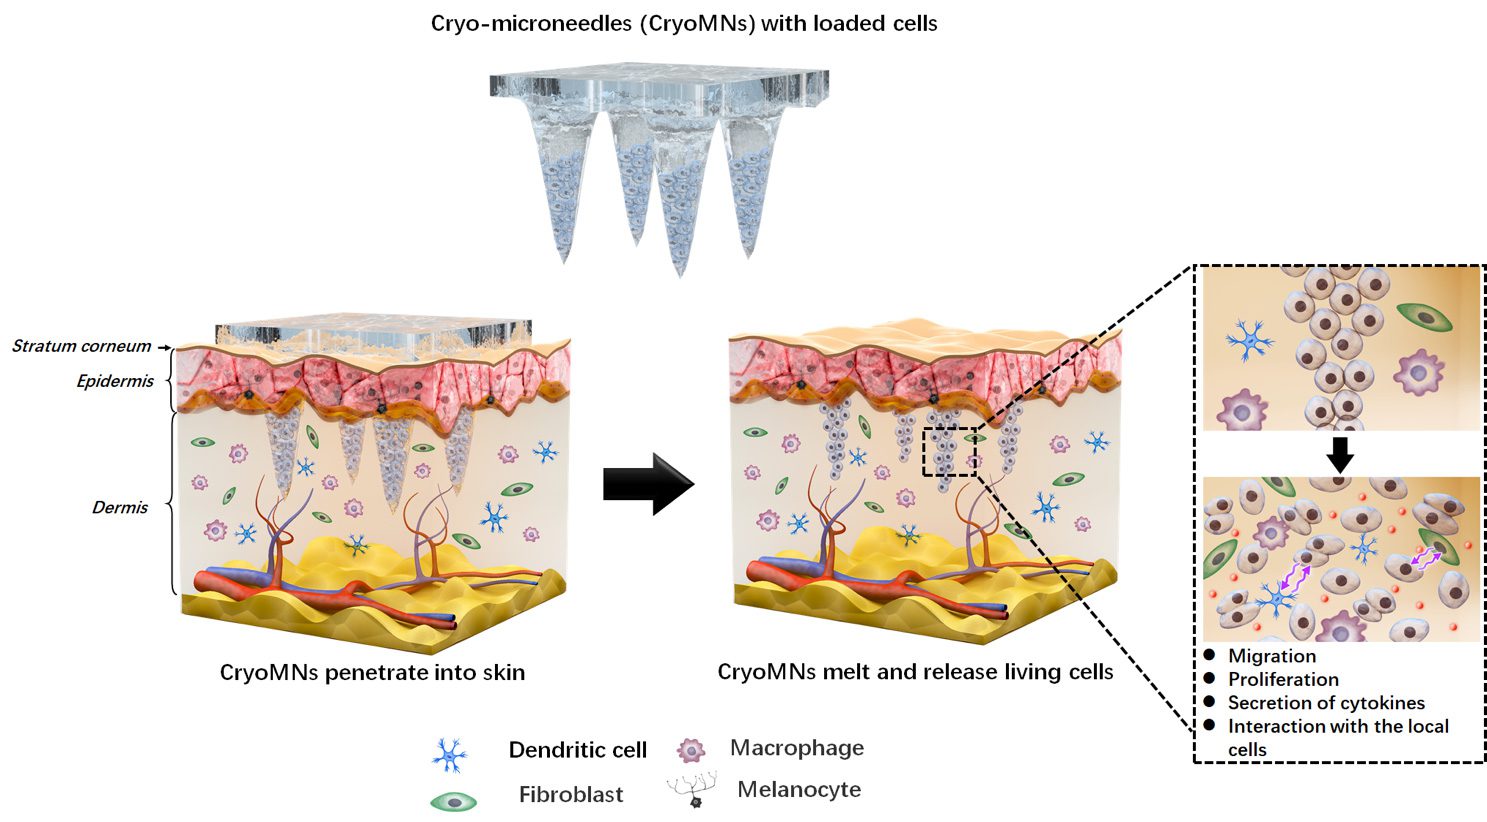 Schematic illustration of the transdermal delivery of cells using cryomicroneedles.